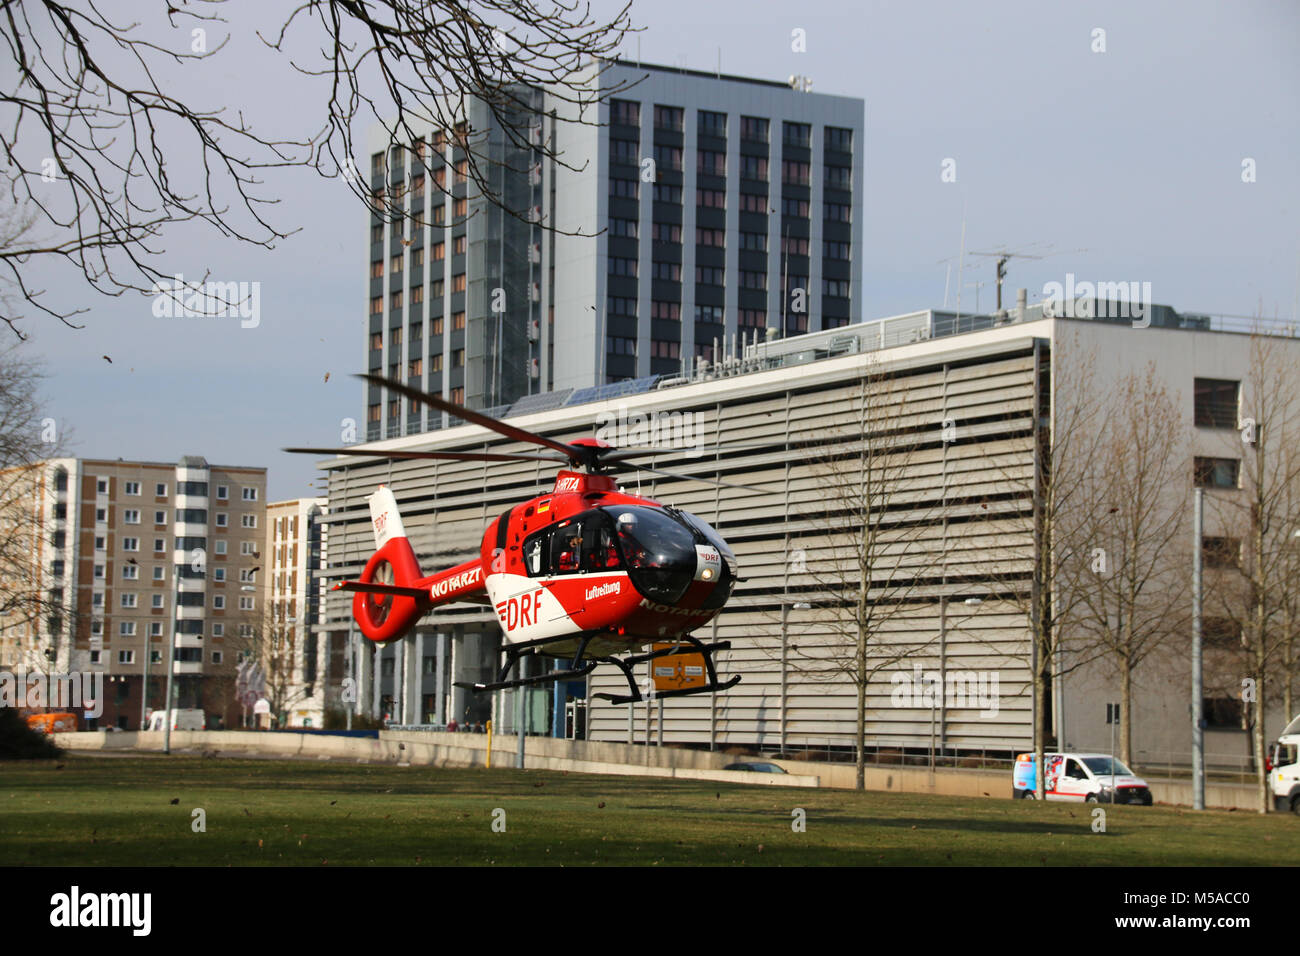 Magdeburg, Germany - 21 February 2018: Launch of the rescue helicopter Christoph 36 in Magdeburg, Germany. The Airbus H 135 helicopter is part of the  Stock Photo